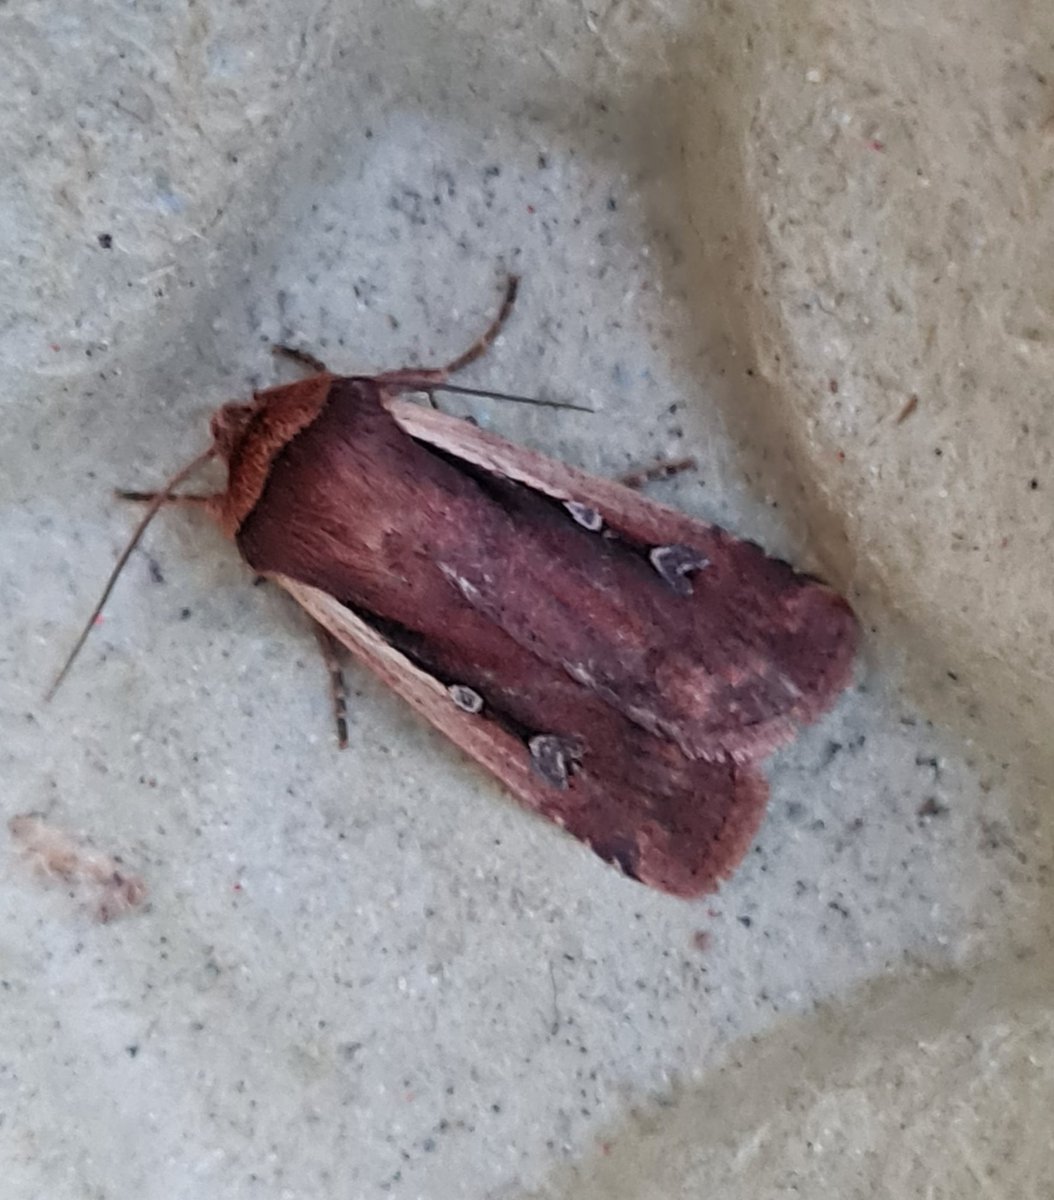 I had a wonderful dream that my trap was inundated with moths, even a spurge hawk moth and swallowtail butterfly. Reality on awakening,  5 of 4 with a brimstone,  2 hc, e. Angustea and this flame shoulder.. 
Reality sucks!!
#mothsmatter #vc35